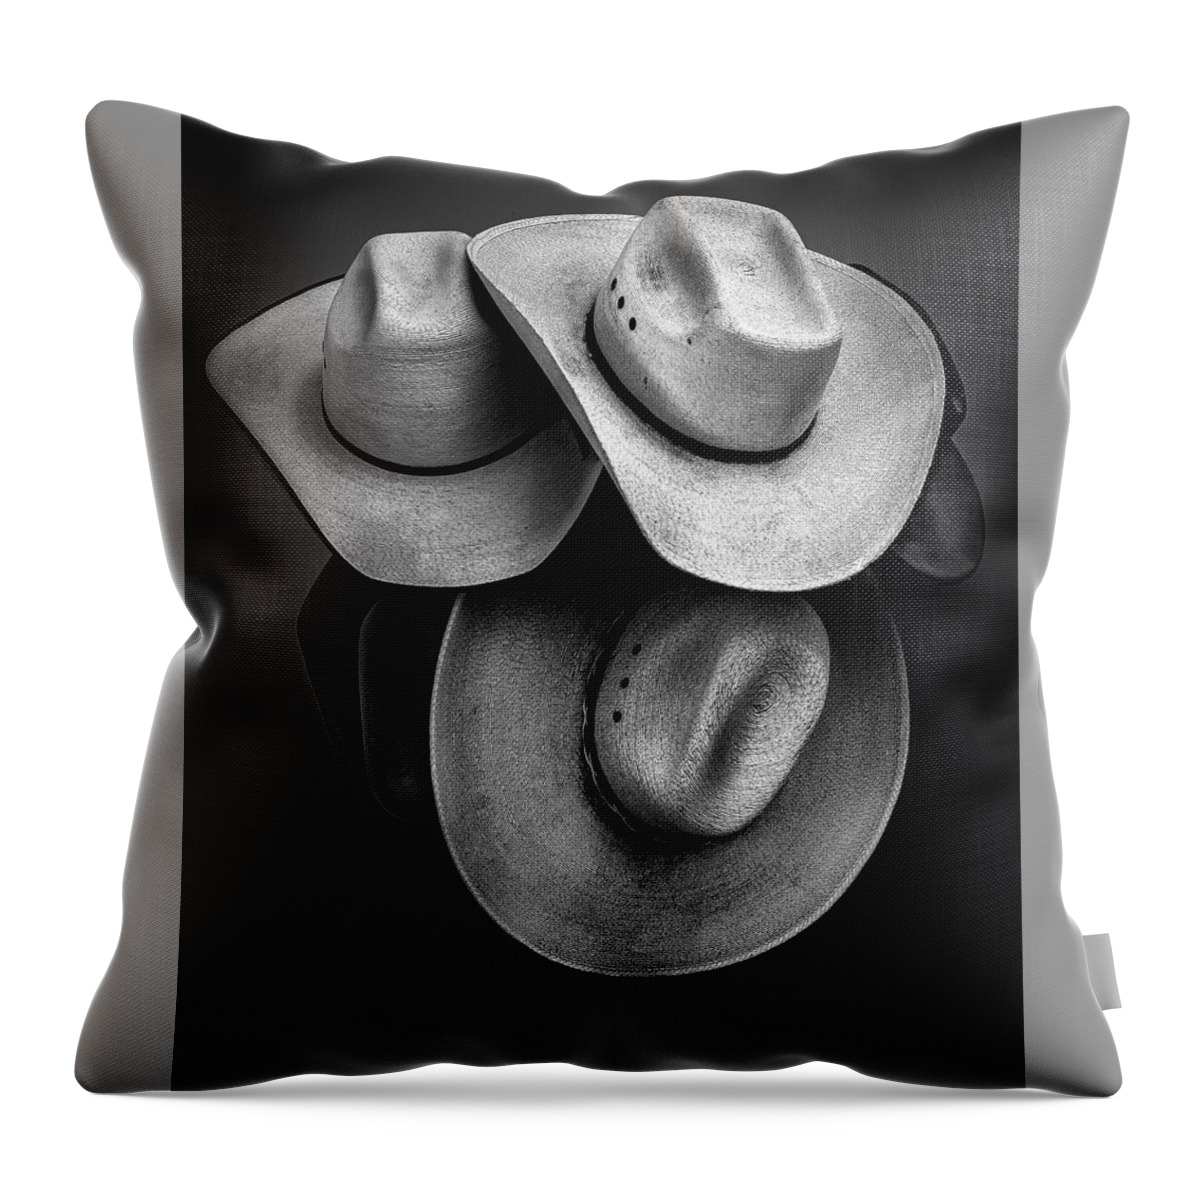 2019 Throw Pillow featuring the photograph Cowboy Hats in Black and White by James Sage